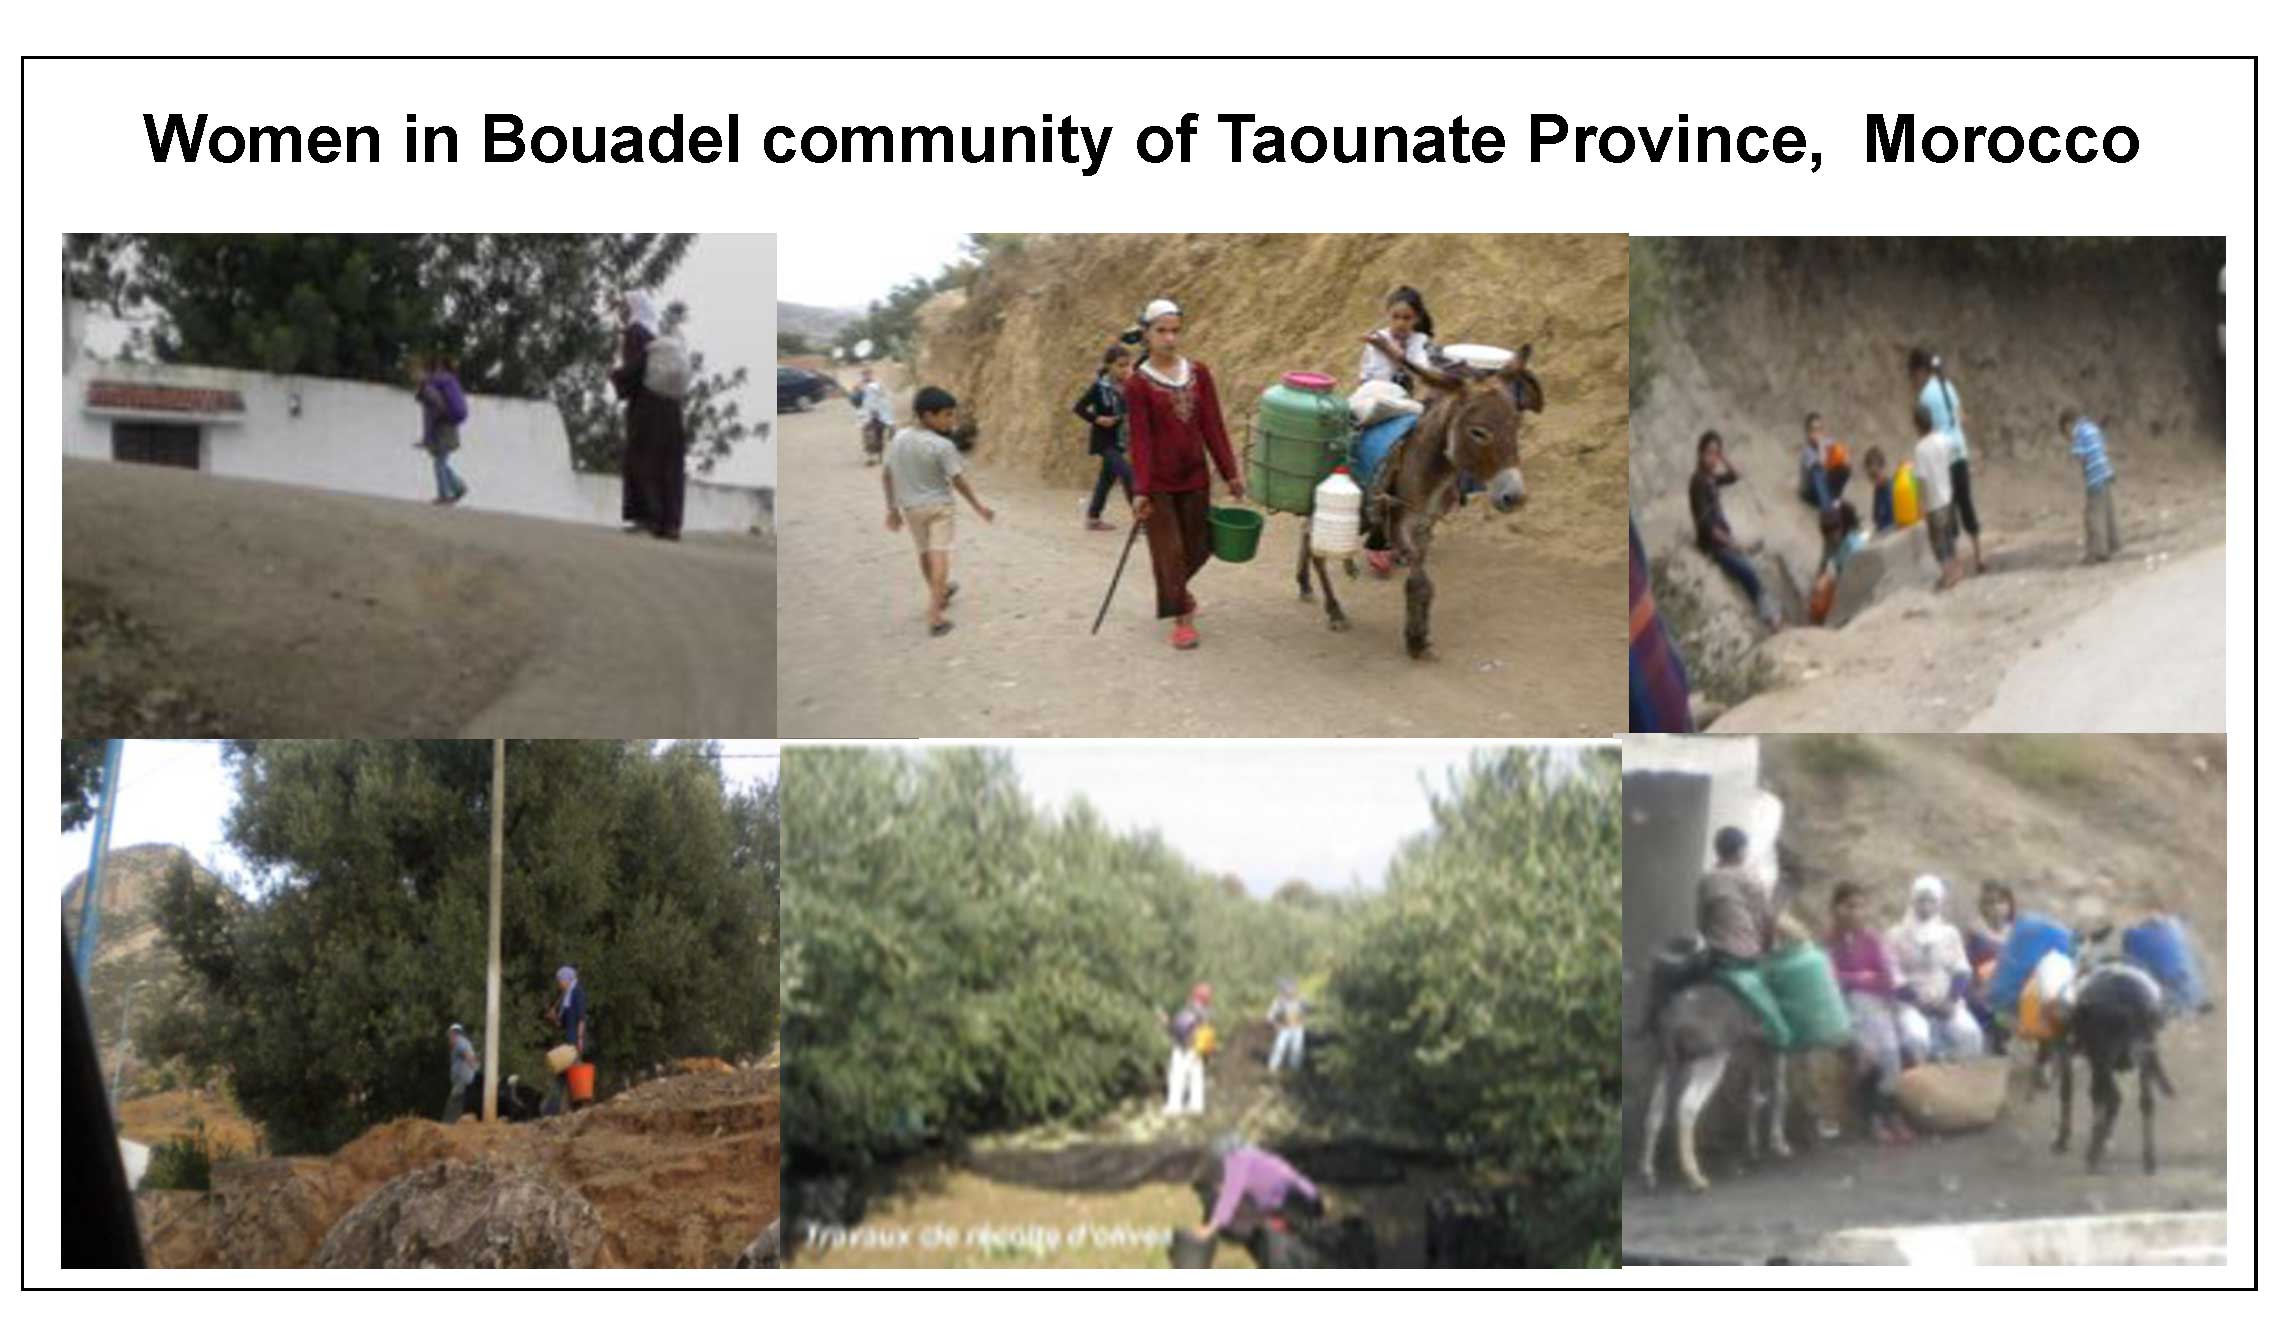 Education, Illiteracy and Women in Rural Morocco: Case Study of Taounate Province 